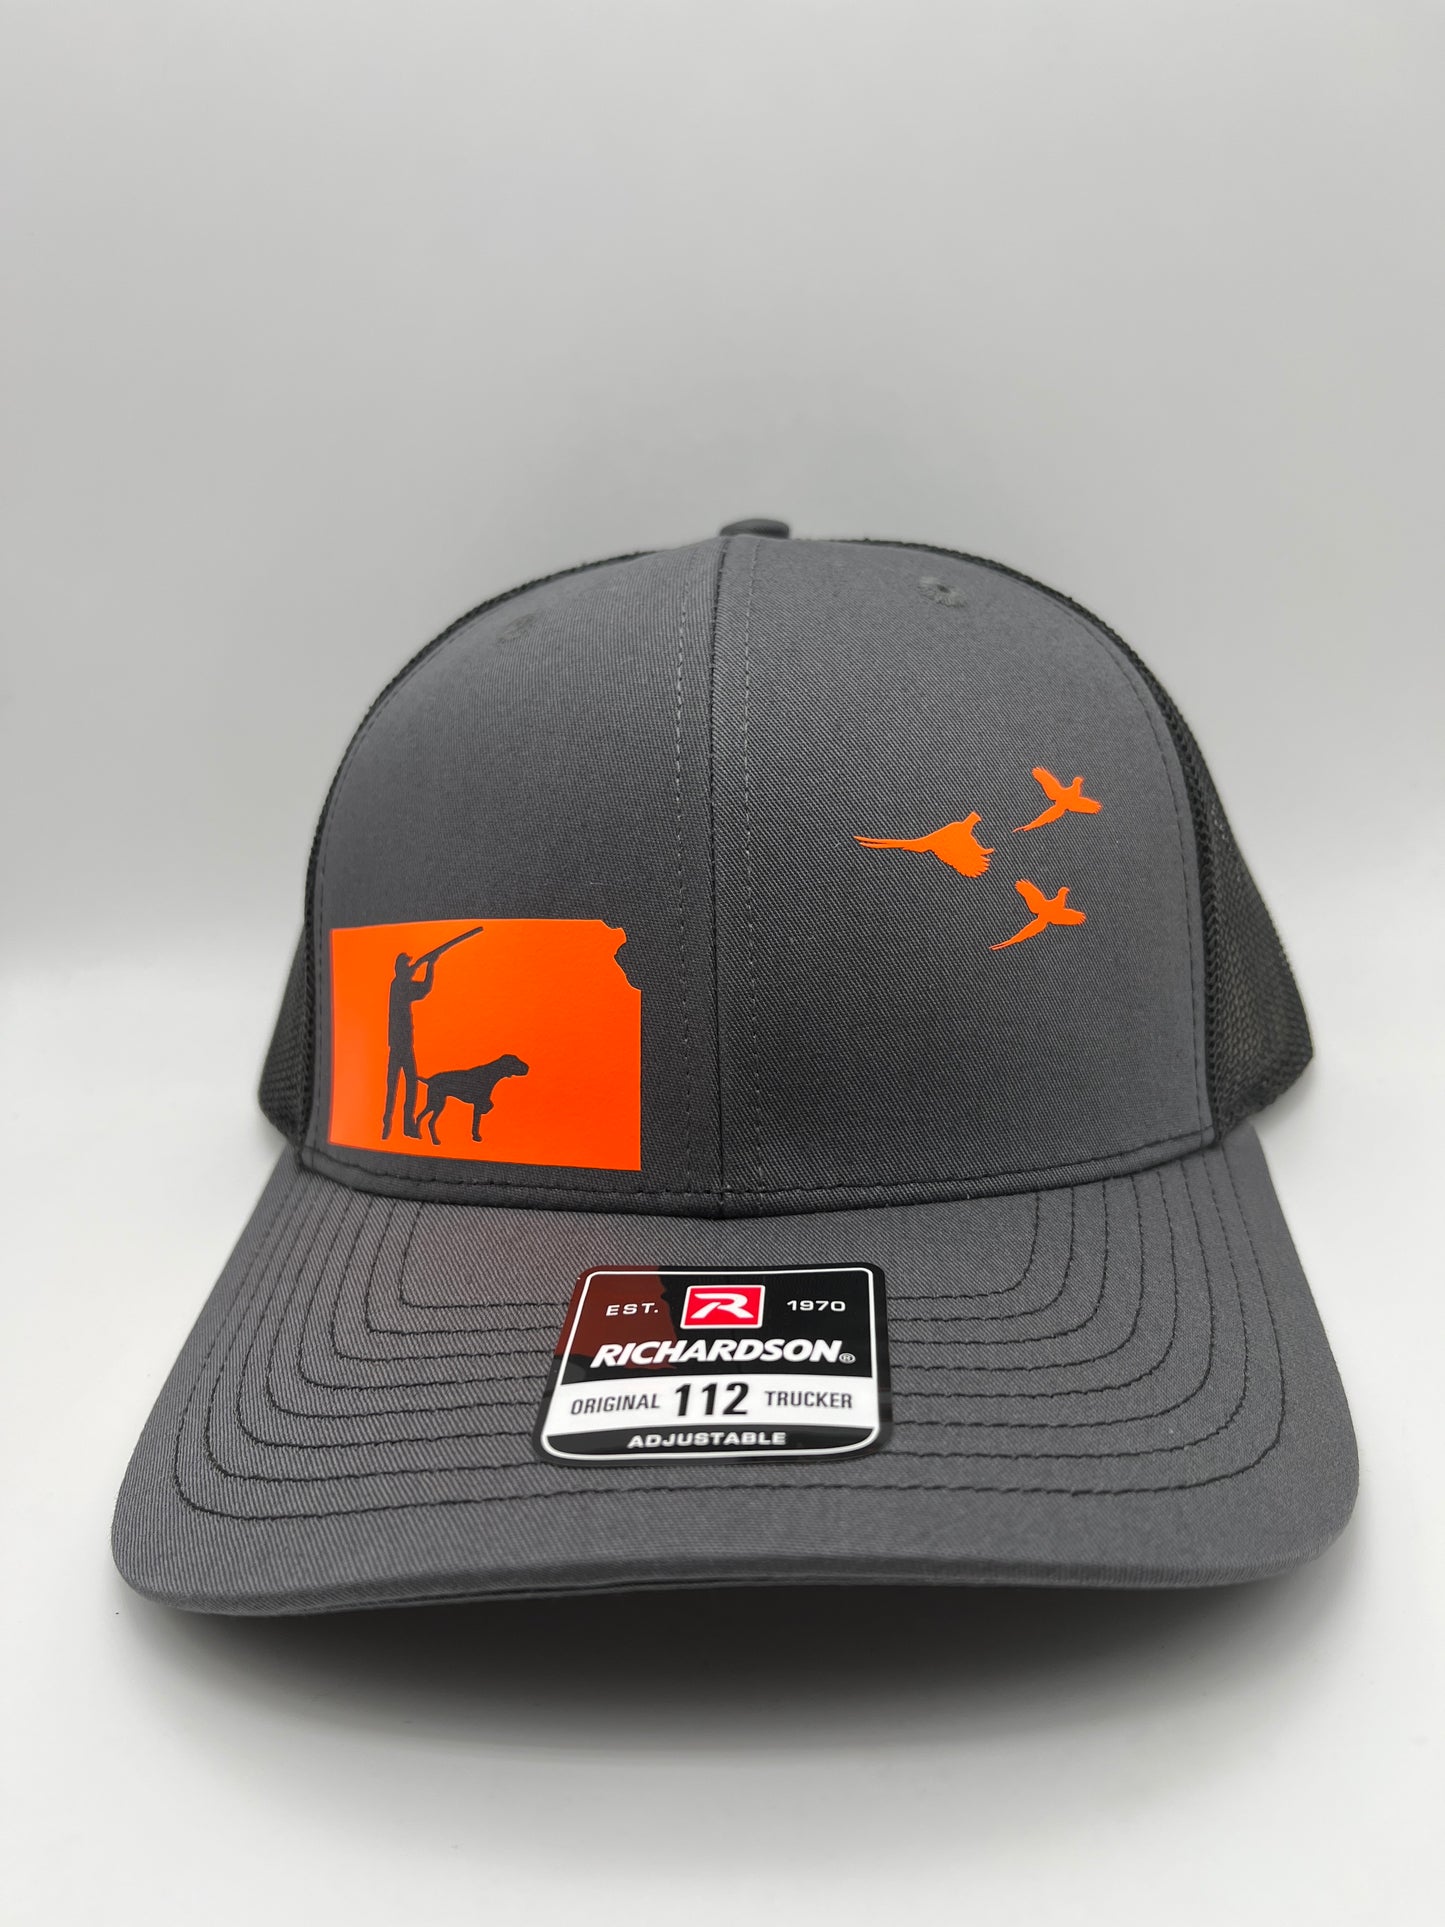 State Pheasant Hunting Snapback Adjustable Hat with Multiple Hat Options